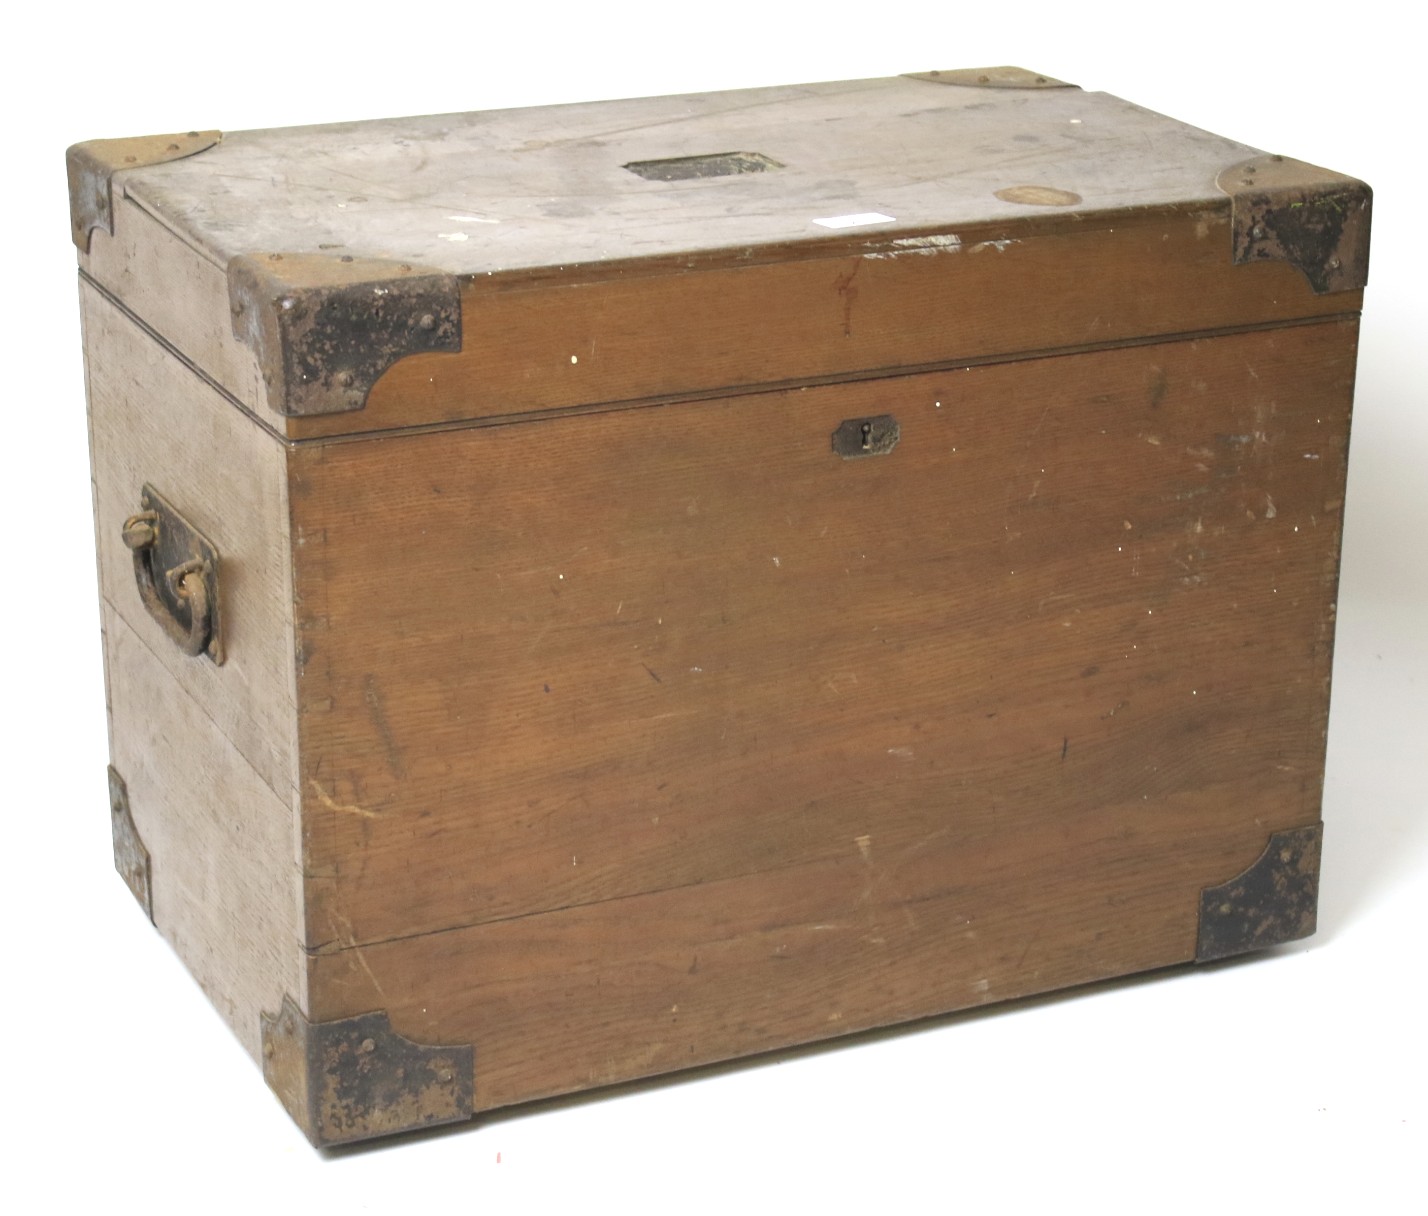 A late 19th century wooden box.